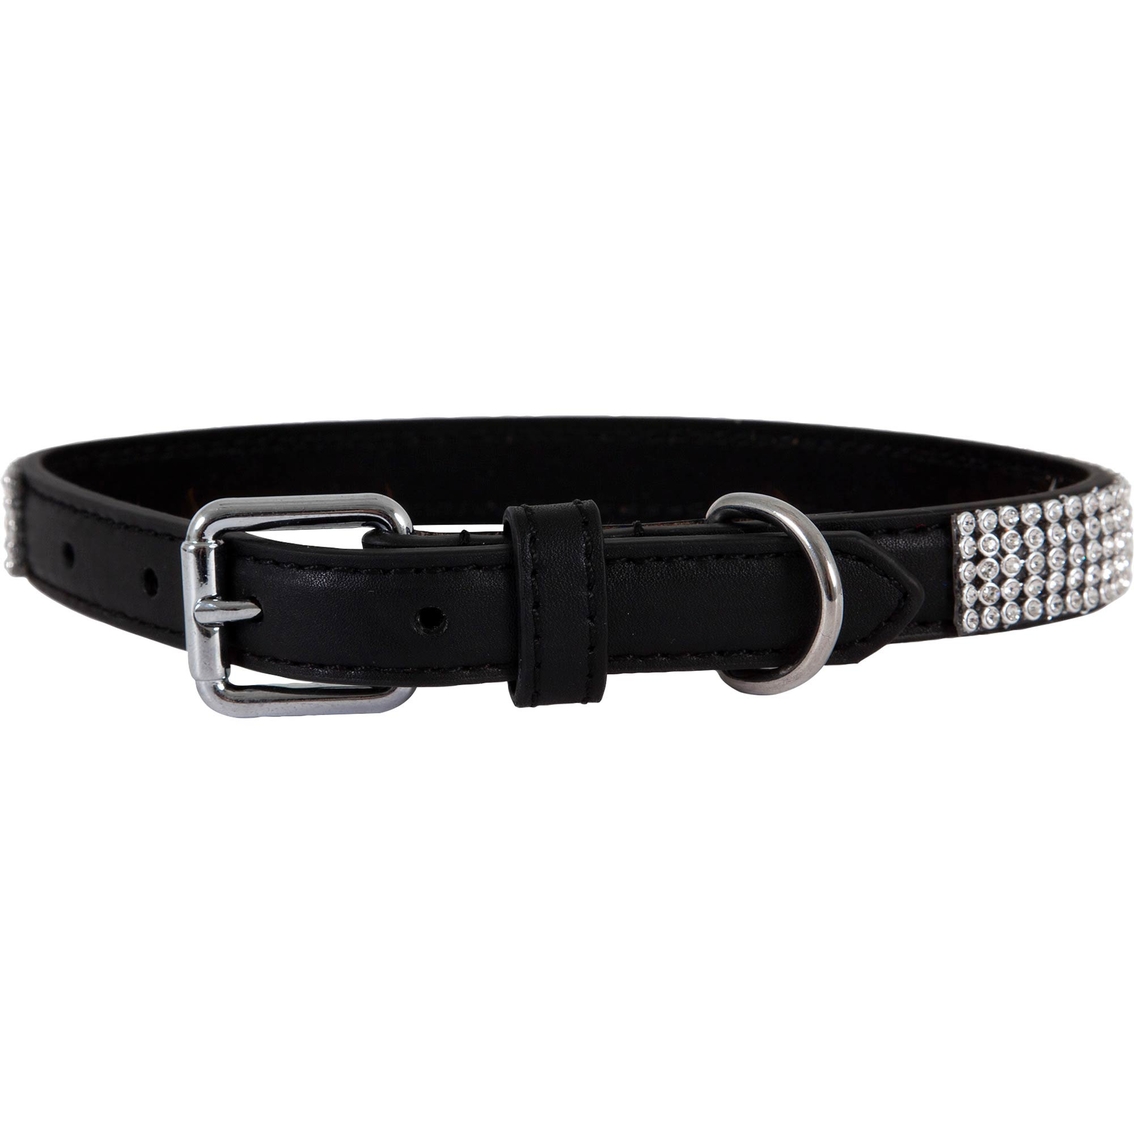 Petmate Leather Bling Dog Collar | Collars, Leashes & Harnesses ...